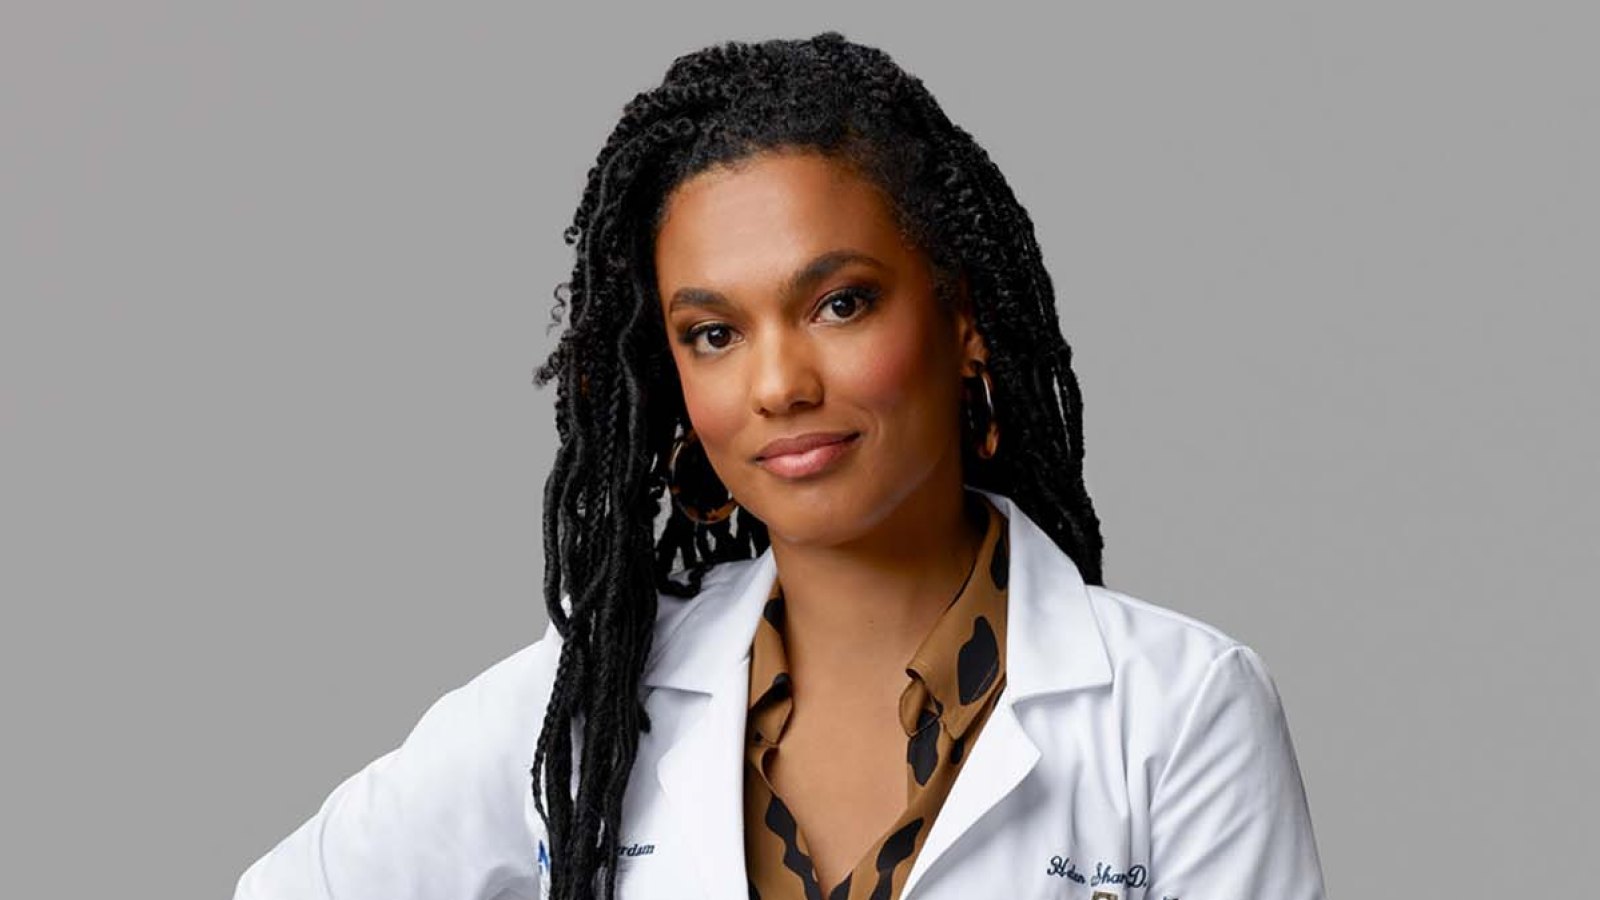 New Amsterdam's Freema Agyeman Announces She Is Leaving the Series